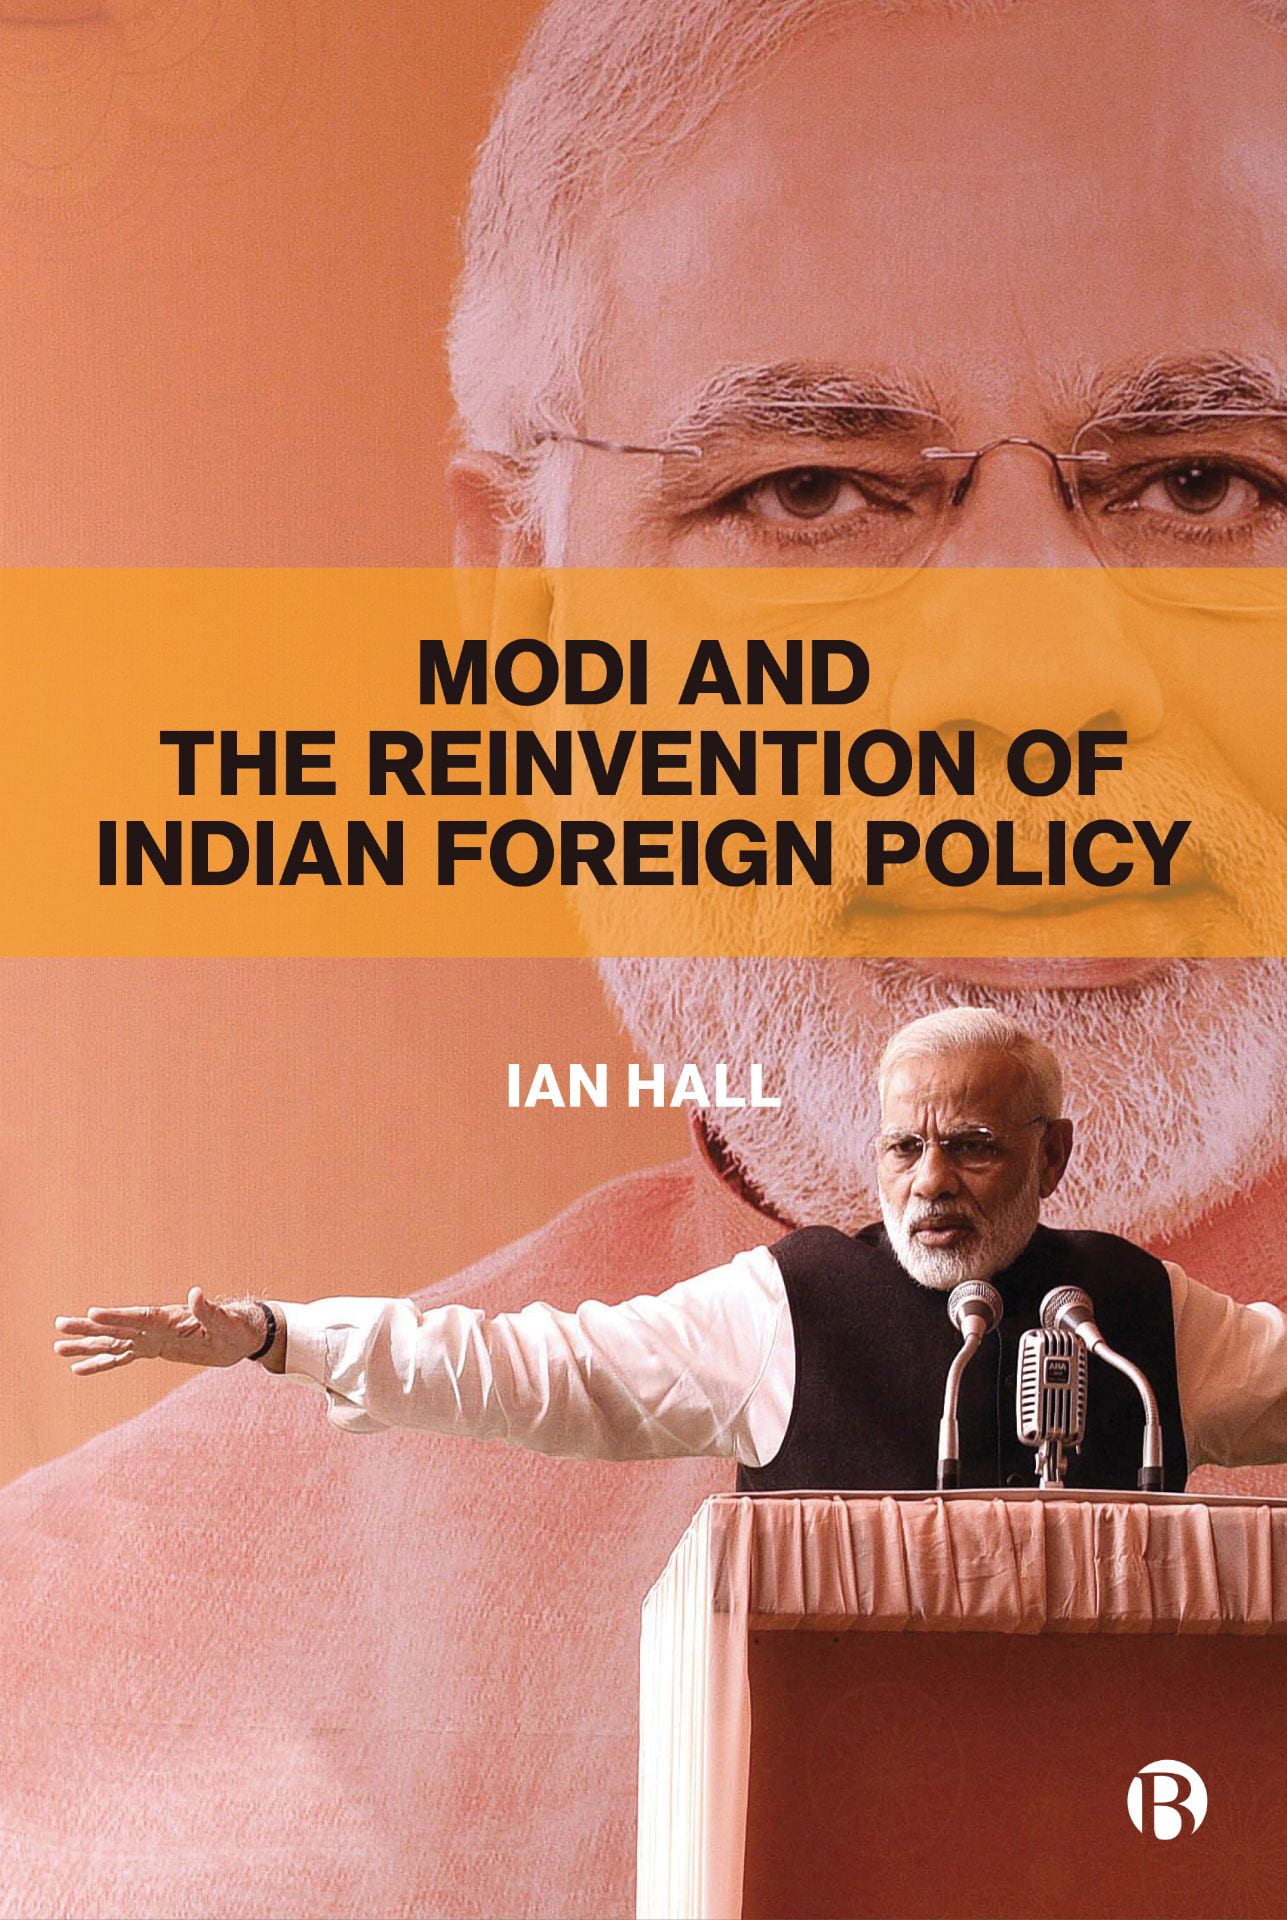 Orange cover with superimposed images of Indian Prime Minister Narendra Modi; text: Modi and the Reinvention of Indian Foreign Policy by Ian Hall